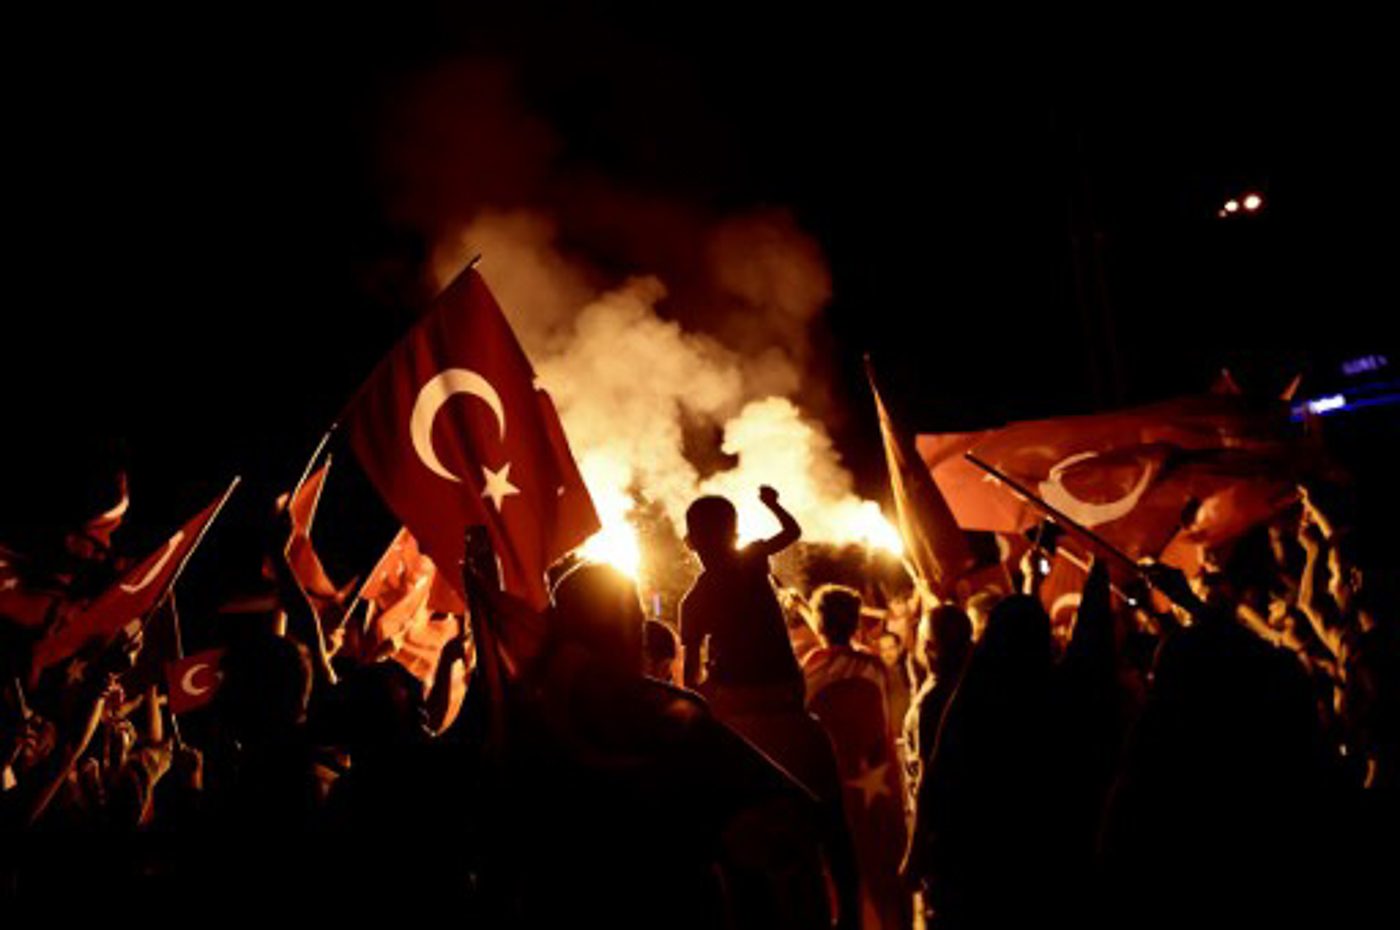 Pro-Erdogan supporters wave Turkish national flags during a rally at Taksim square in Istanbul on July 18, 2016 following the military failed coup attempt of July 15. Aris Messinis/AFP 